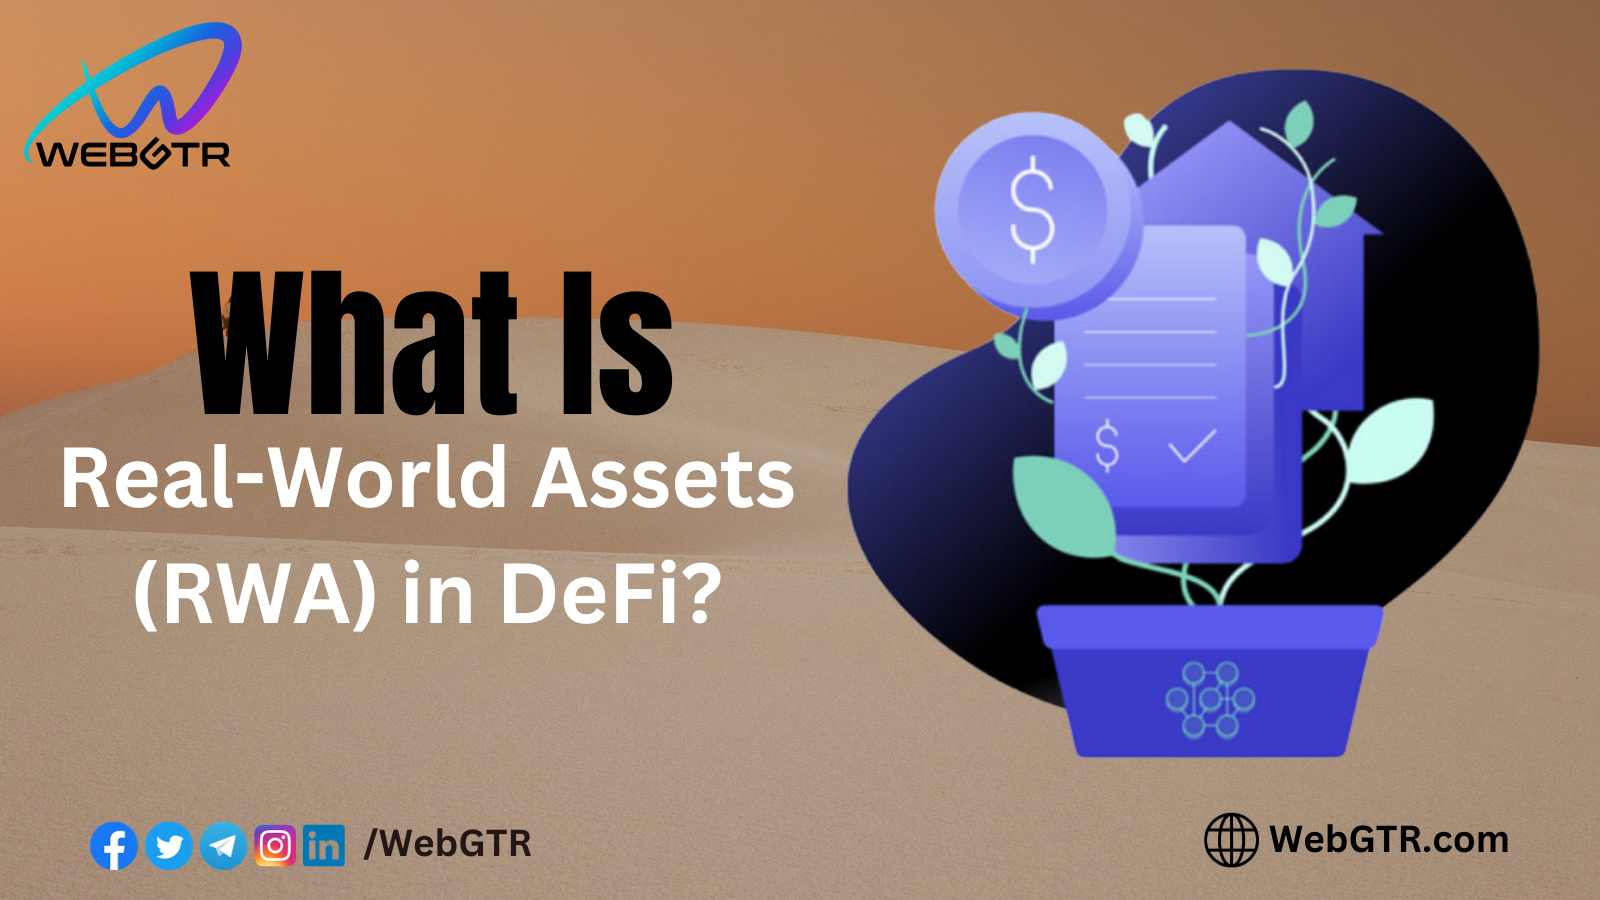 What are Real-World Assets (RWA) in DeFi?